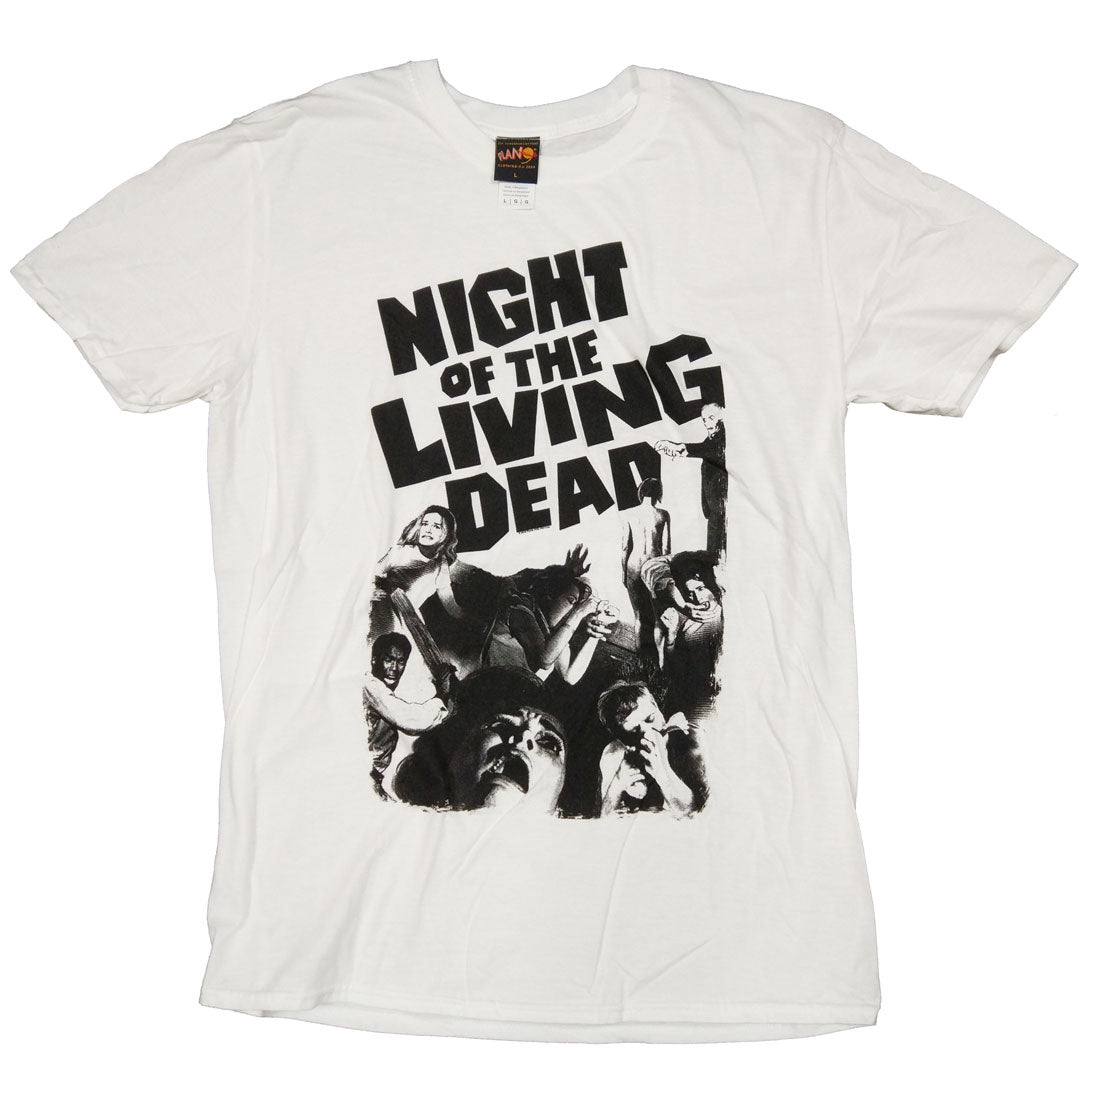 Night Of The Living Dead T Shirt - 100% Official Classic Poster Design White